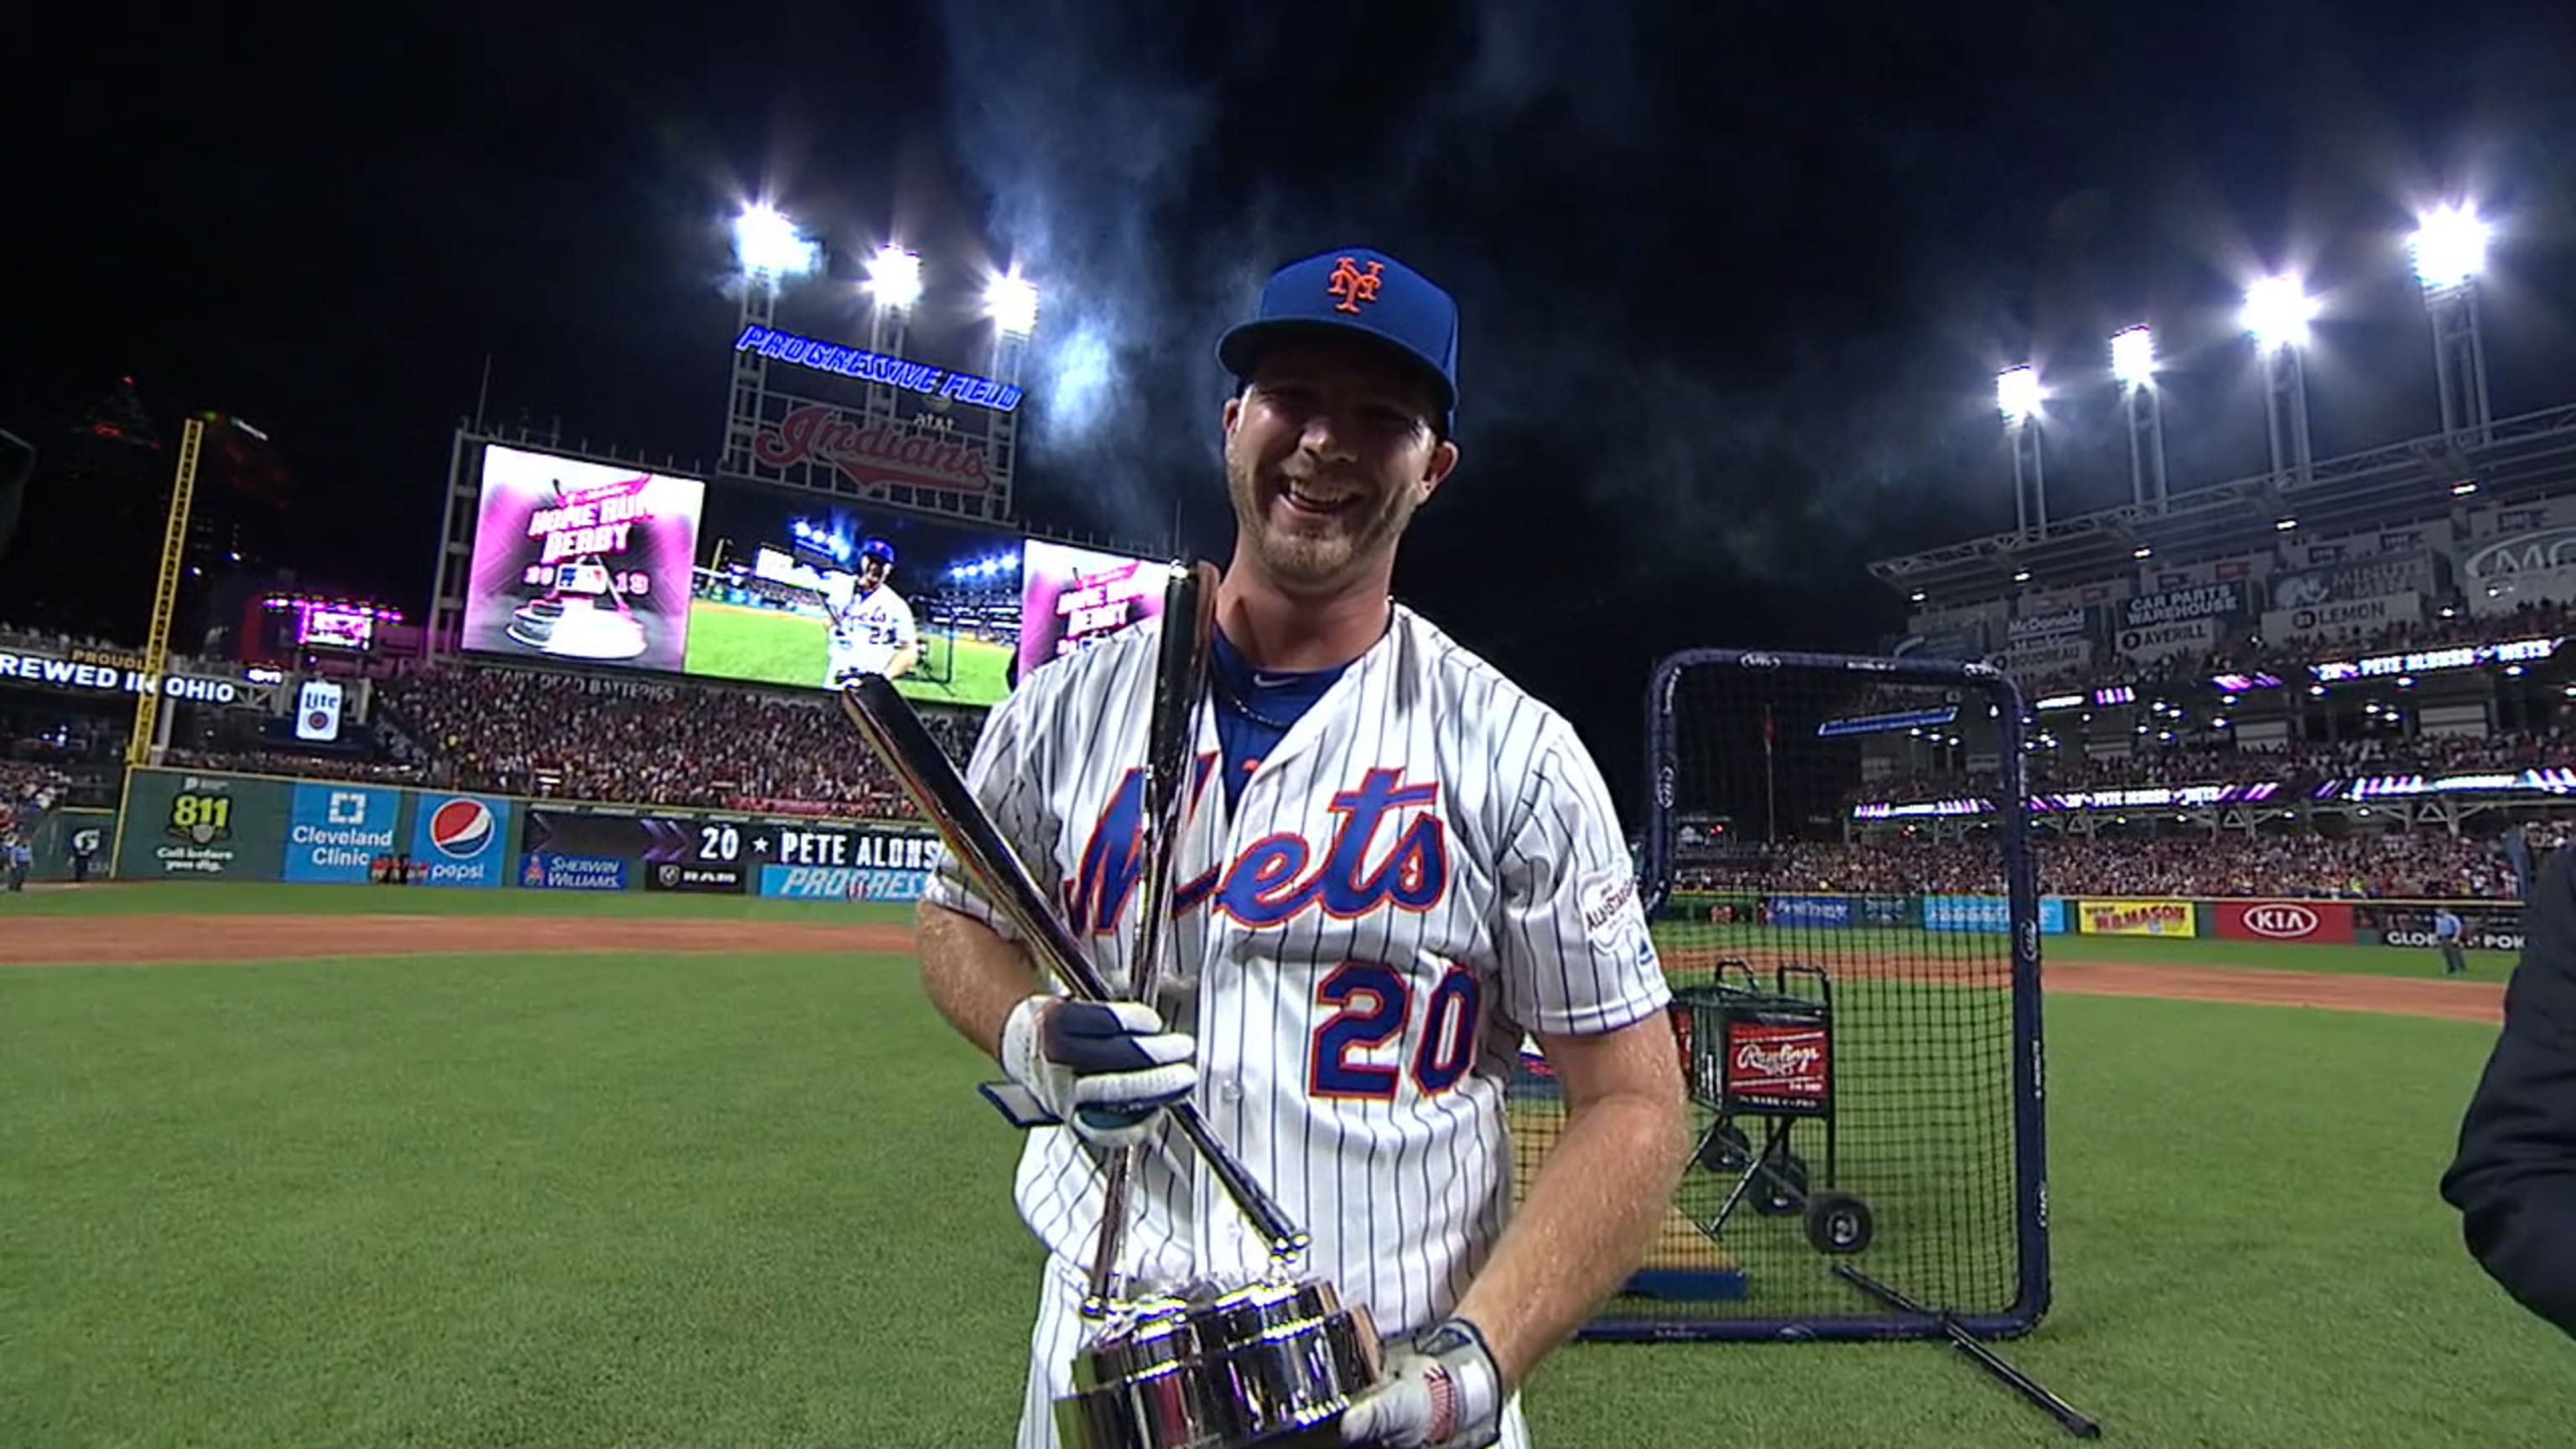 Pete Alonso wins 2021 Home Run Derby